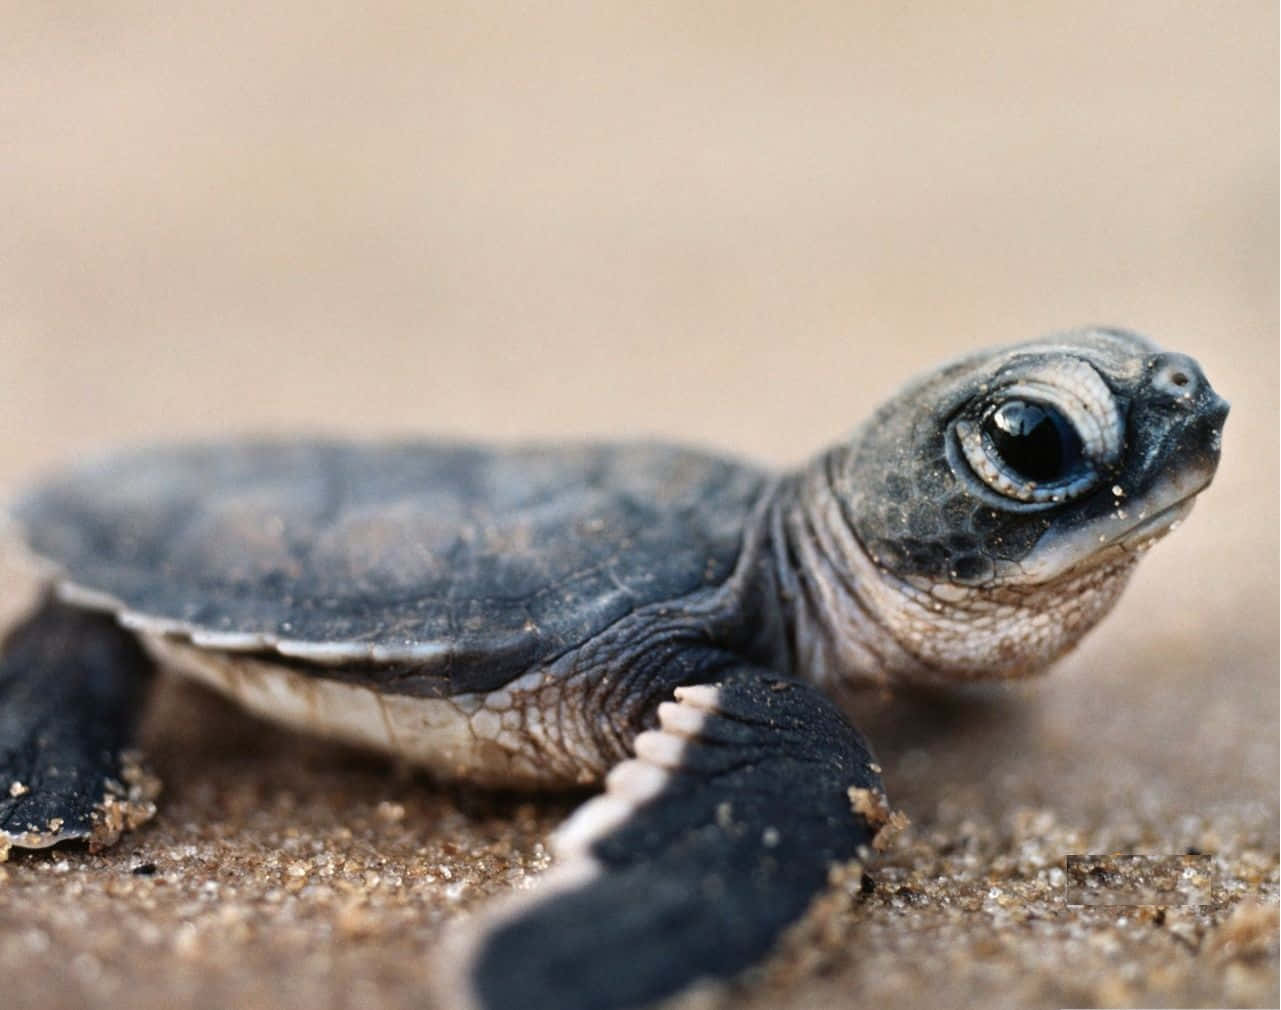 a baby turtle is walking on the sand